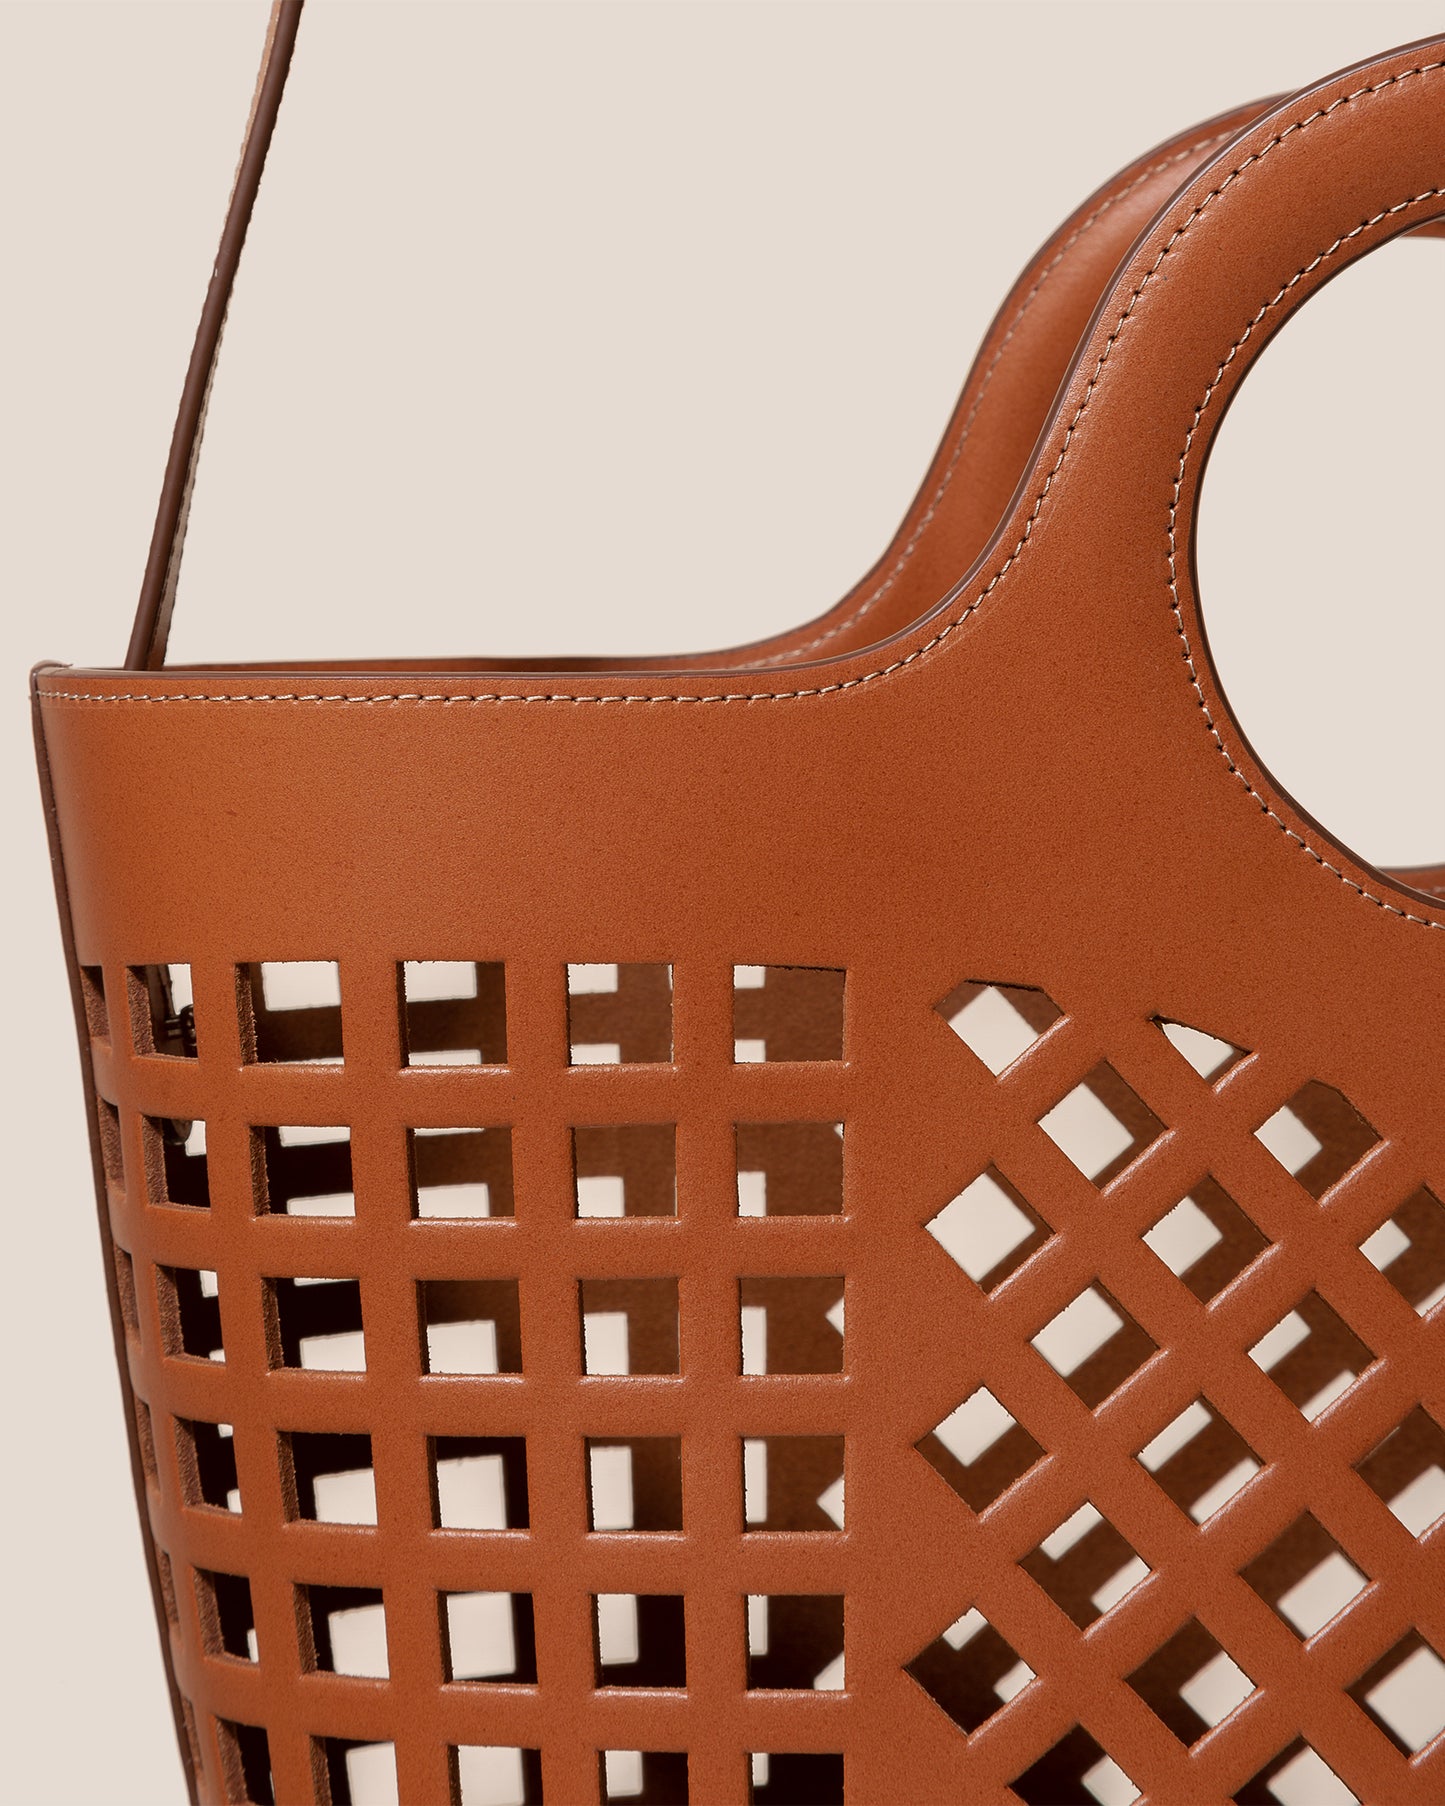 COLMADO - Cut-out Leather Tote Bag